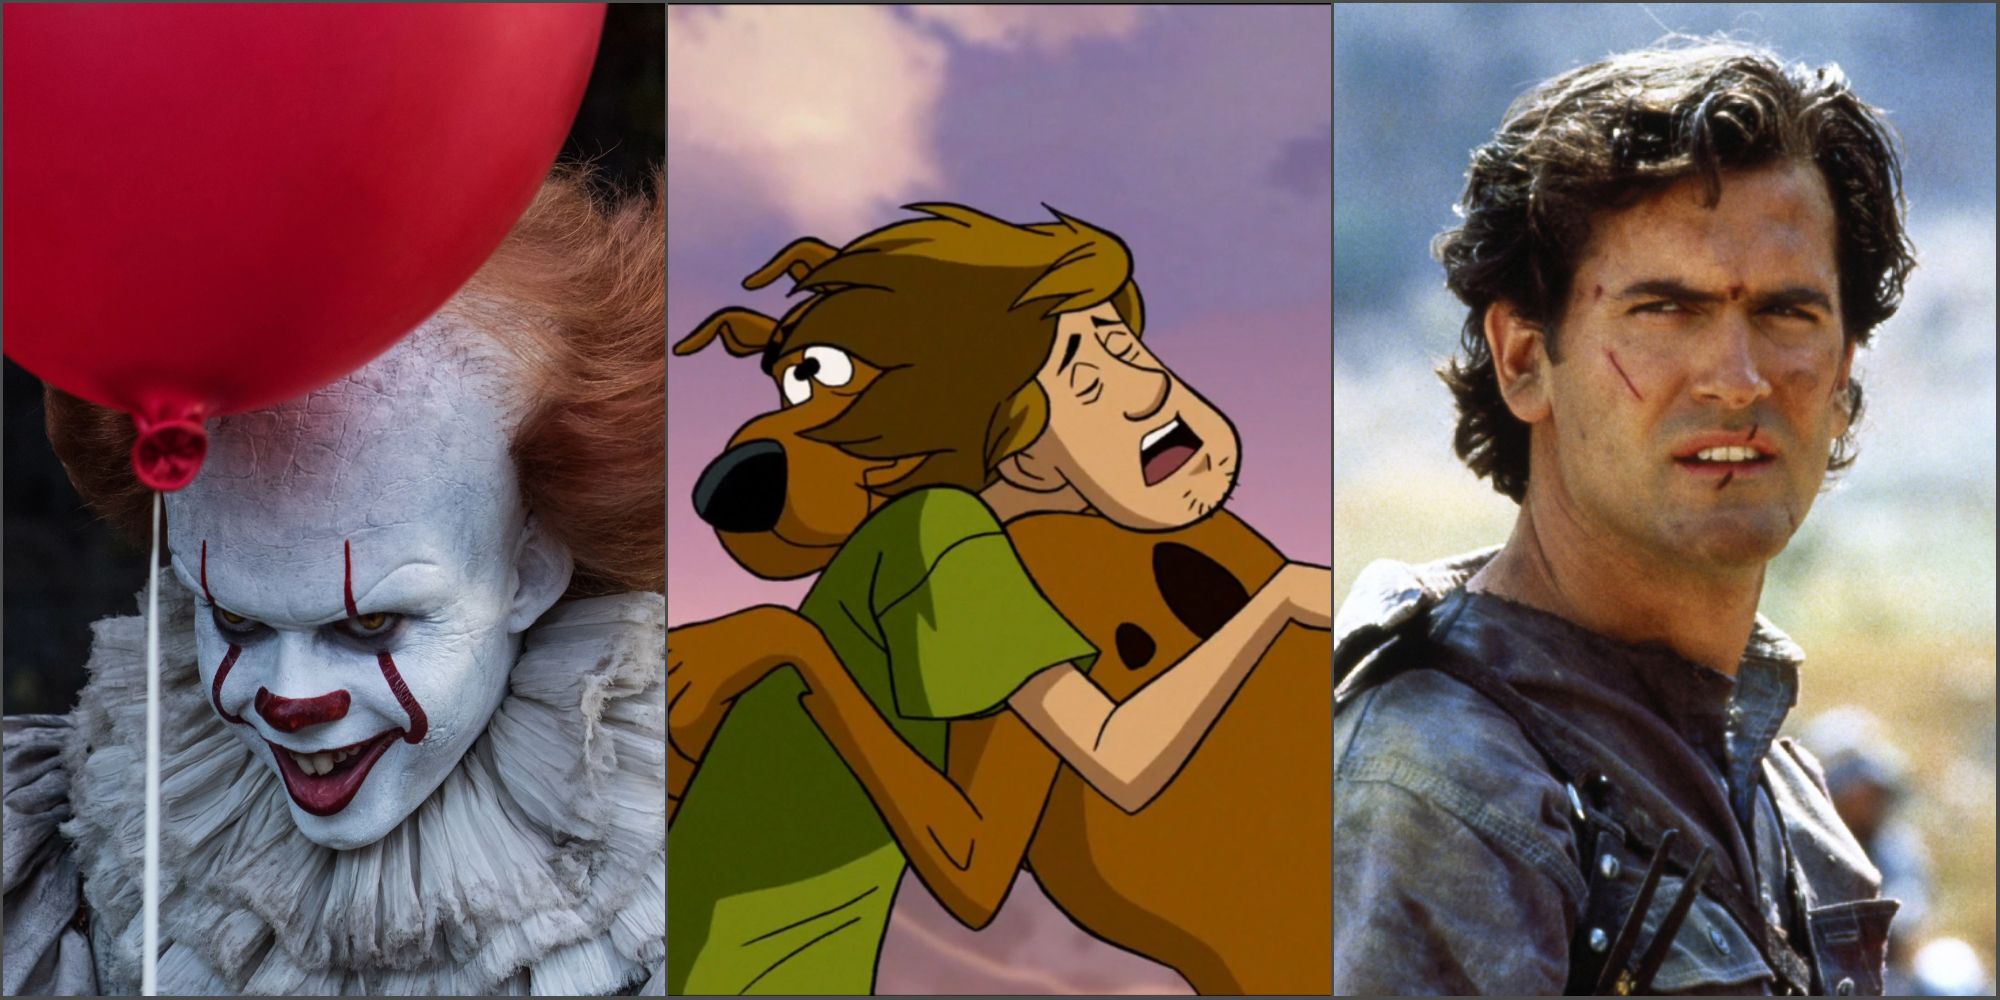 Movies: Pennywise from IT, Scooby-Doo & Shaggy from the Scooby-Doo franchise, and Ash Williams from Evil Dead